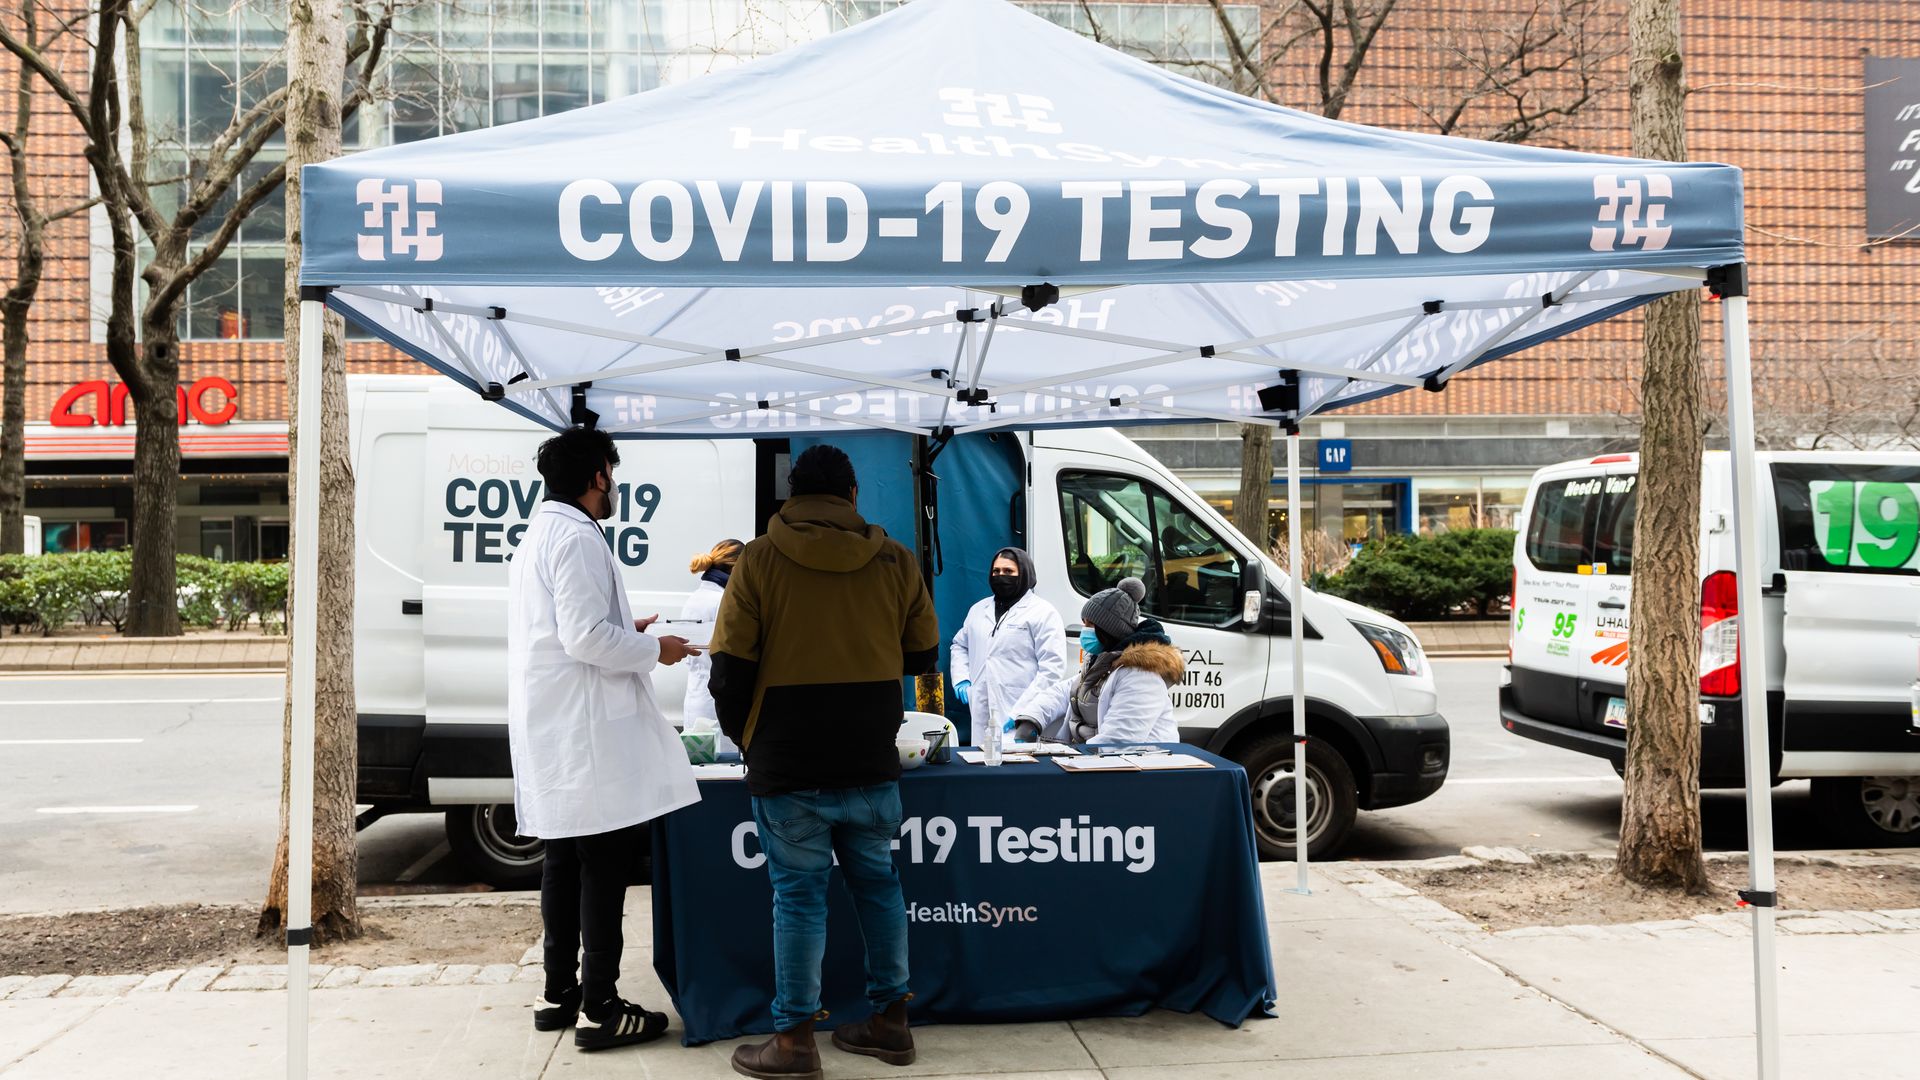 Photo of a COVID testing station with people around it